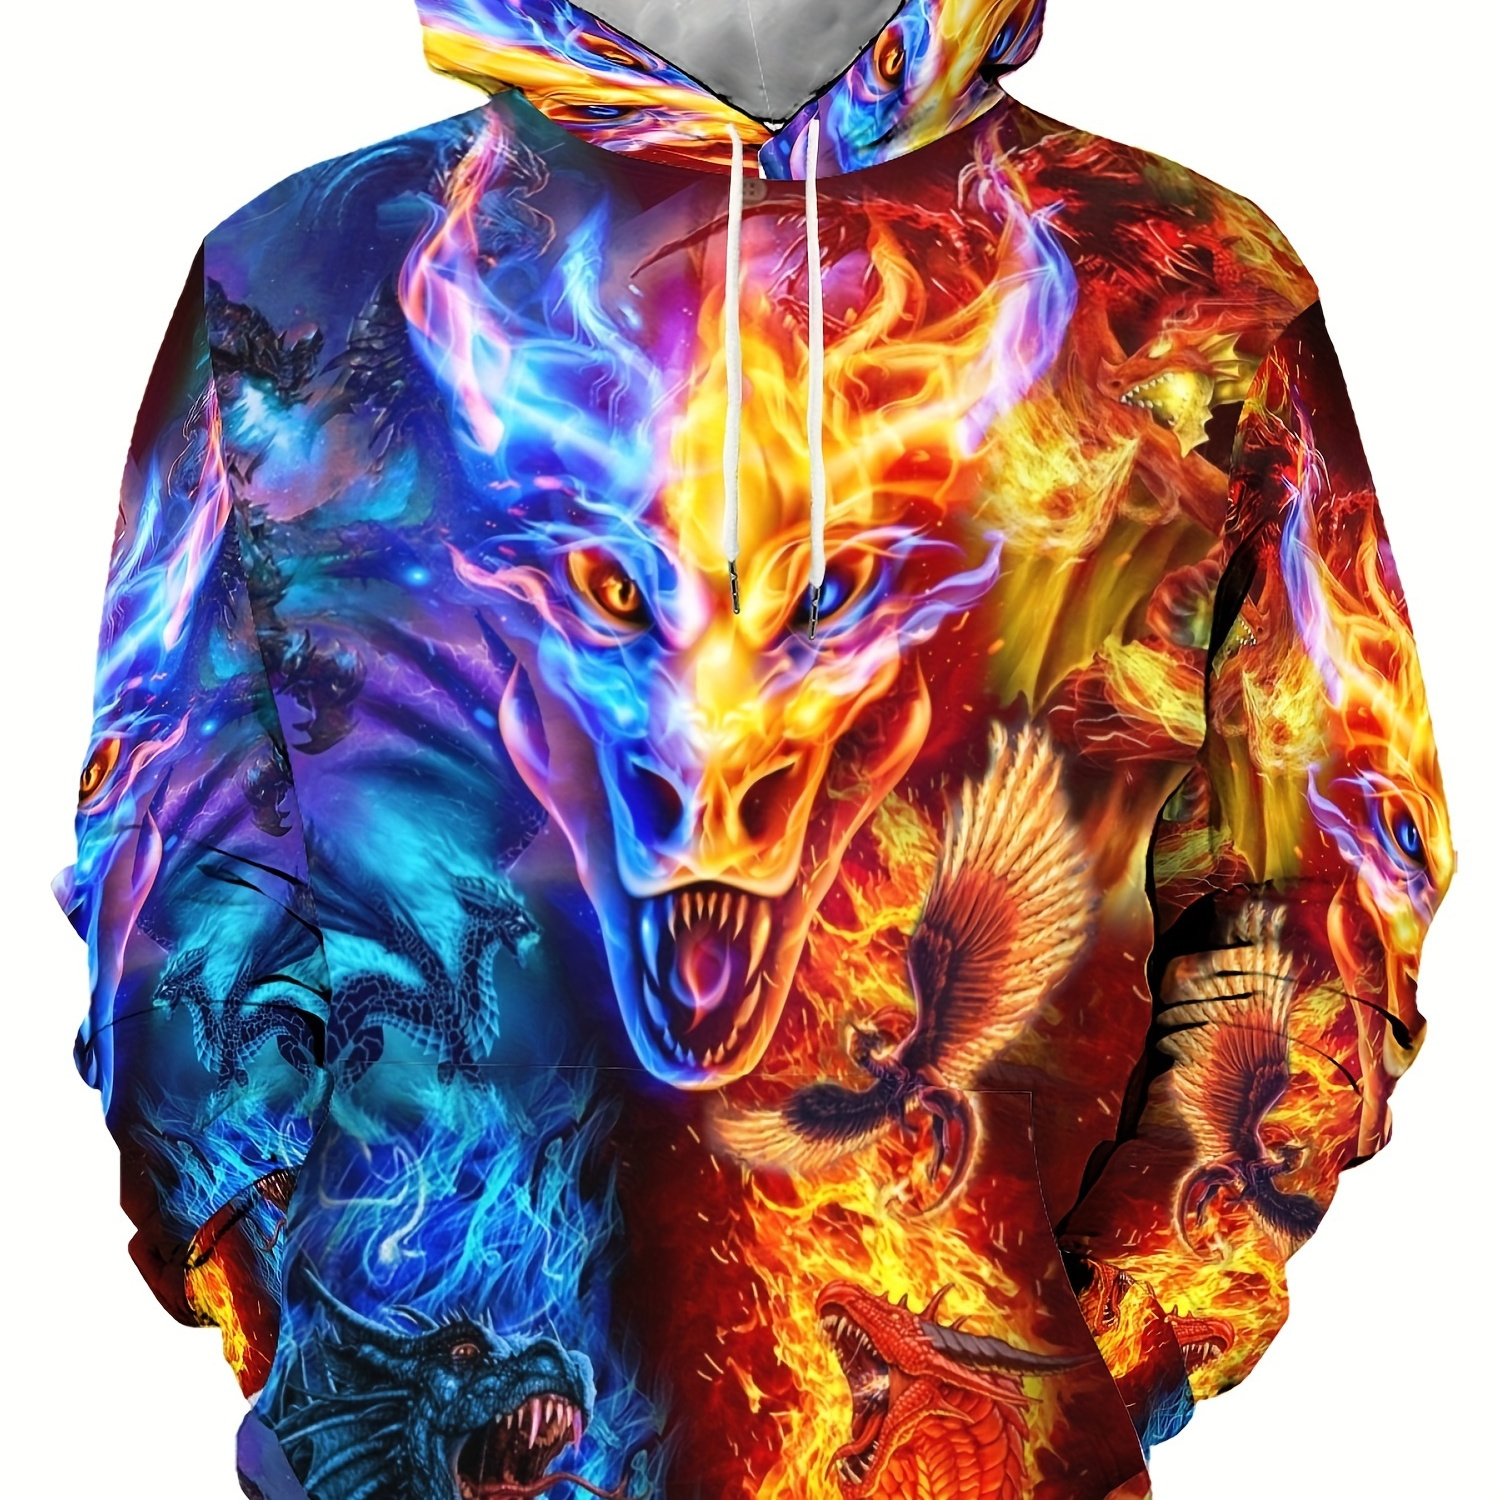 Skull On Fire Print Hoodie, Cool Hoodies For Men, Men's Casual Graphic  Design Pullover Hooded Sweatshirt With Kangaroo Pocket Streetwear For  Winter Fa